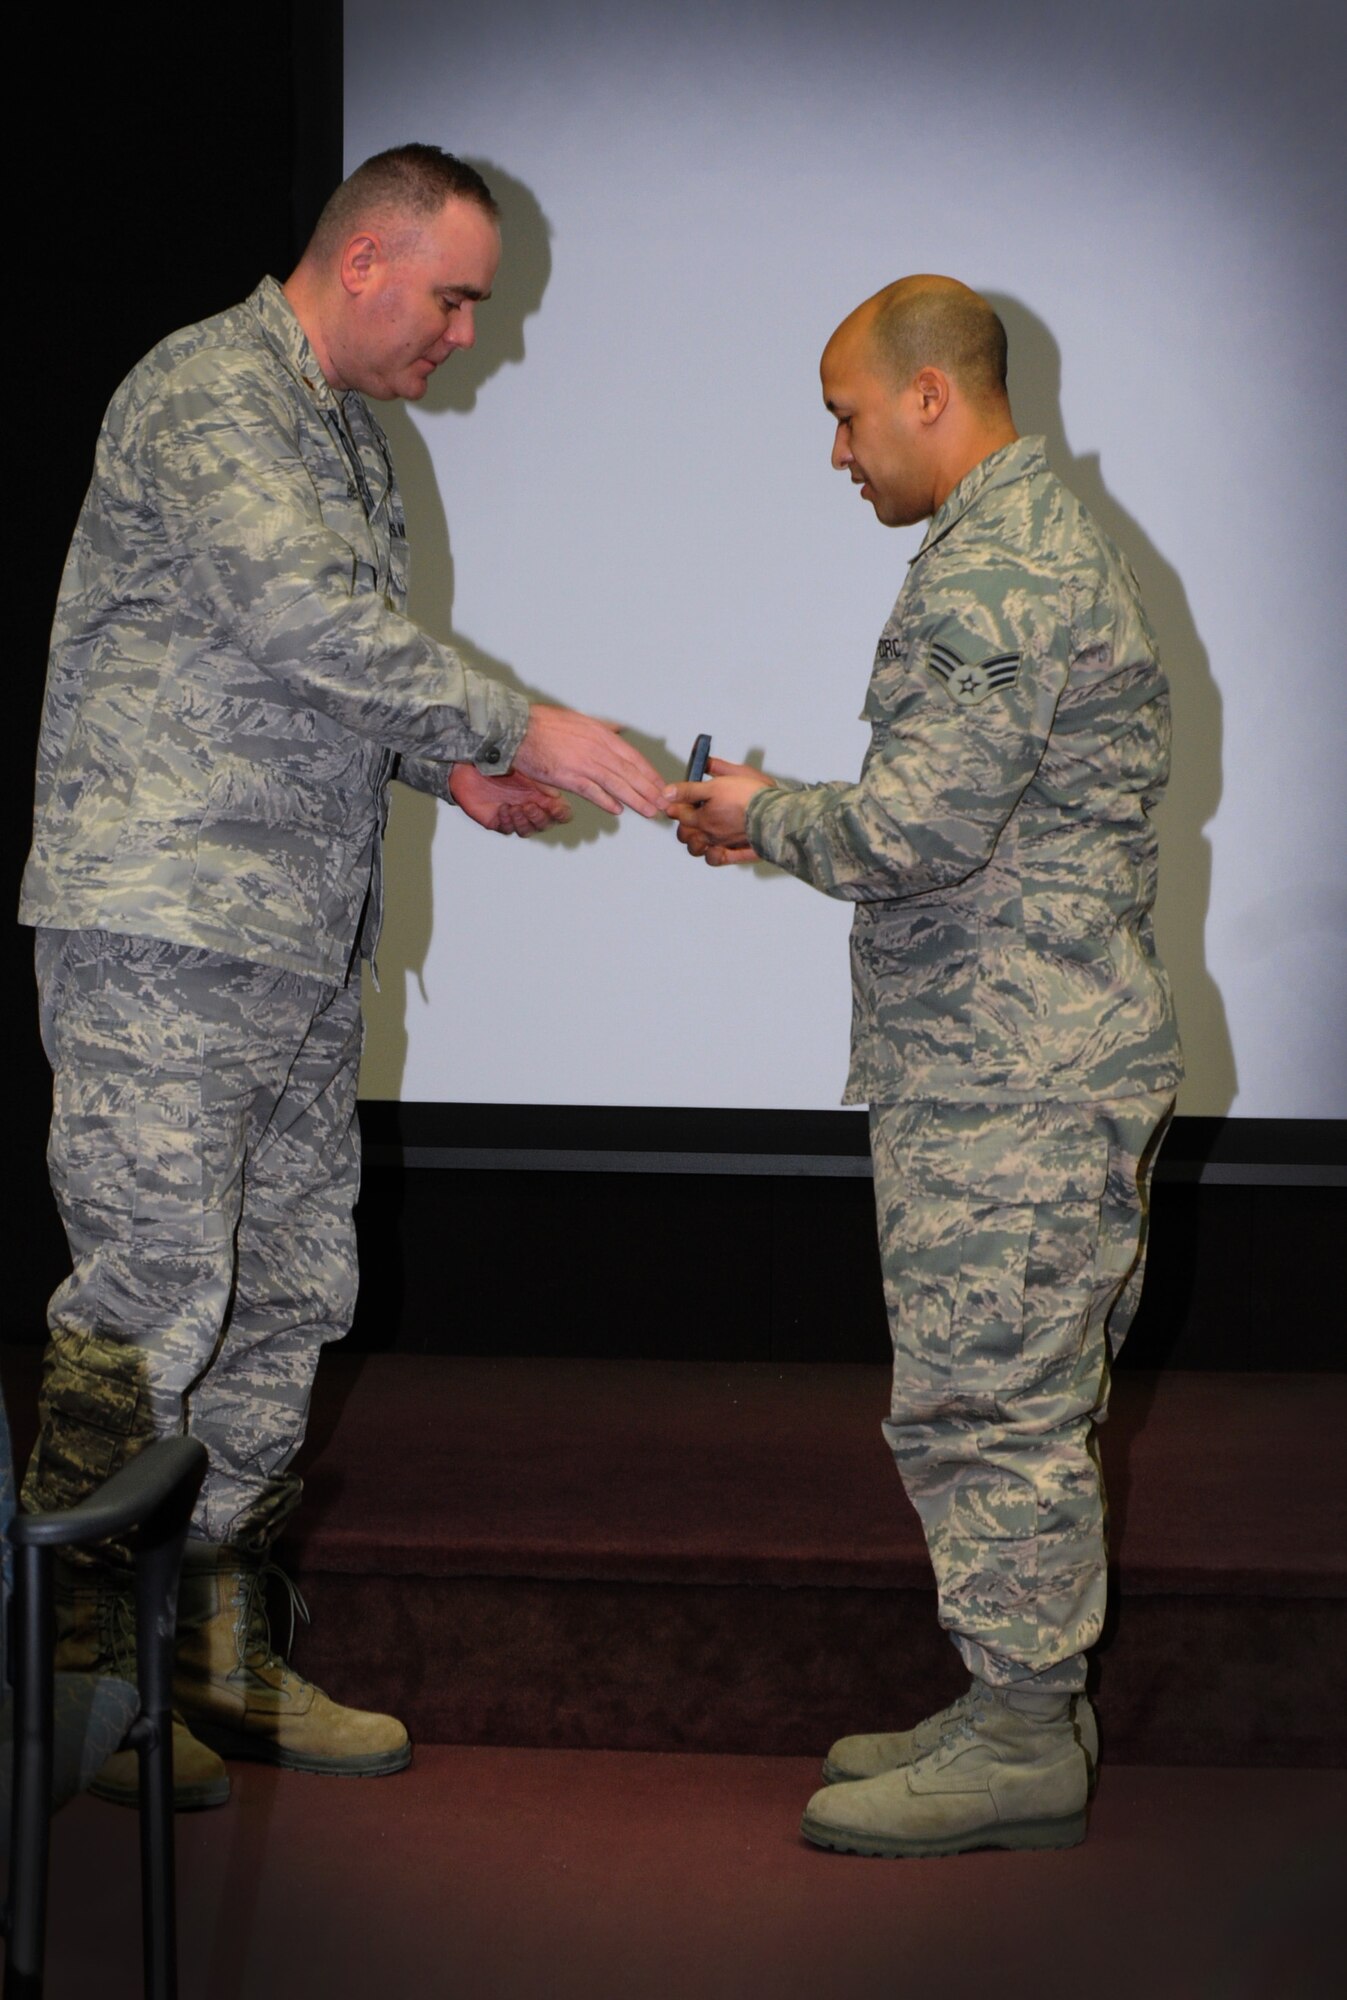 Senior Airman Brandon Glover, 111th Operation Support Squadron cyber operations technician, receives a coin from Major James Best of the 111th Attack Wing, during their commander’s call Feb. 7, 2015, Horsham Air Guard Station, Pa. The coin was given to Glover as part of a reenlistment recognition program sponsored by the National Guard Bureau (U.S. Air National Guard photo by Tech. Sgt. Andria J. Allmond/Released)
